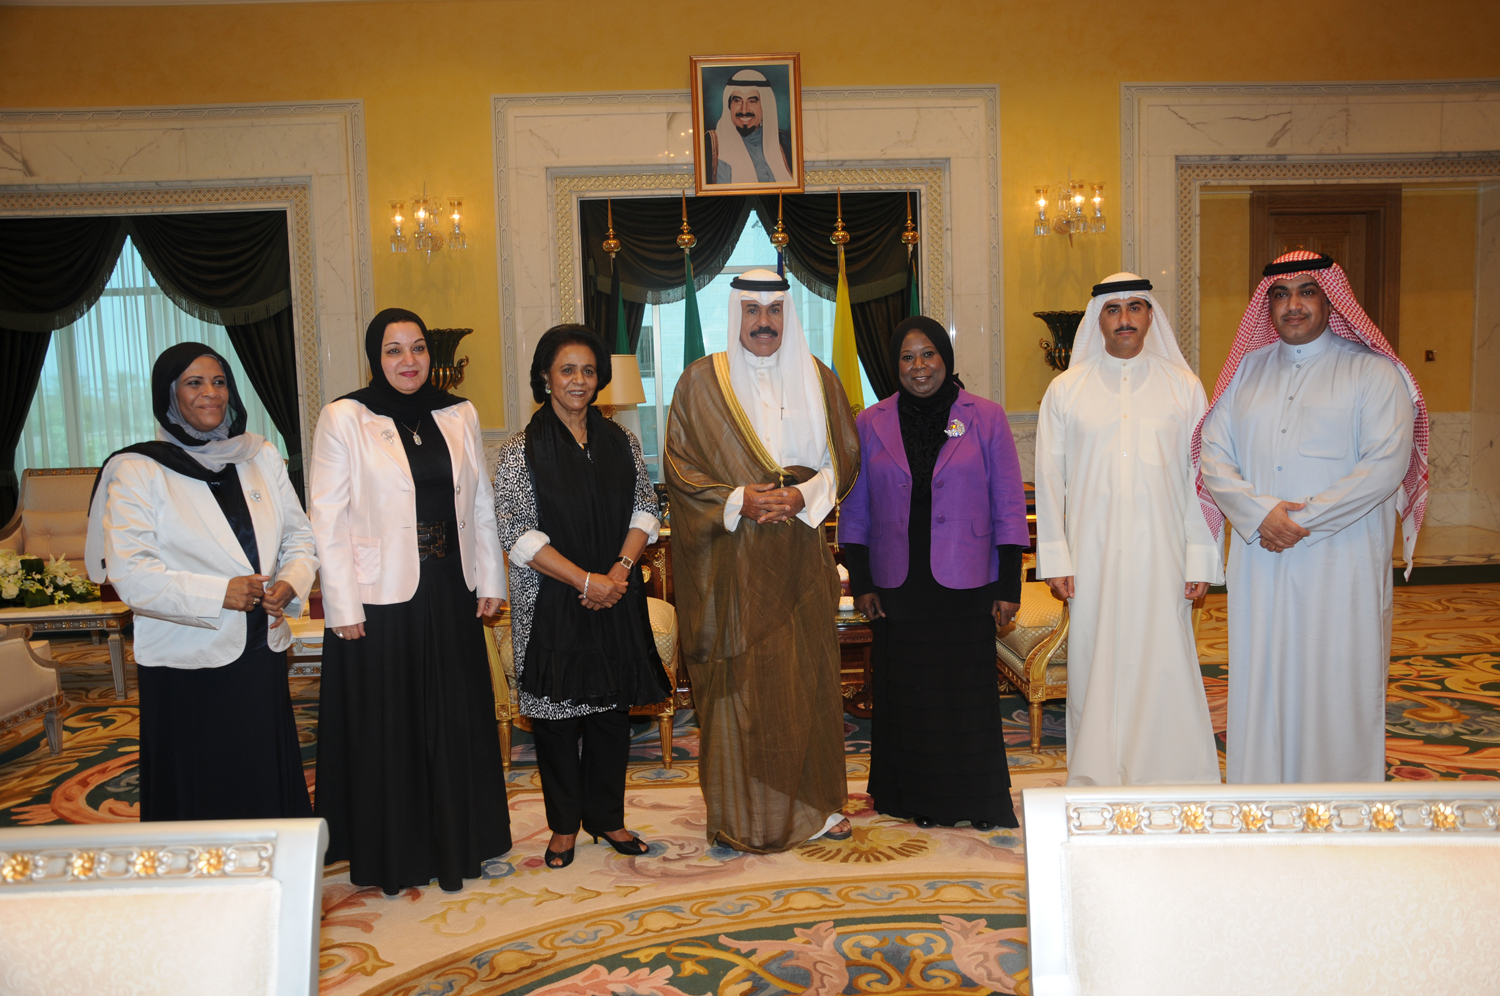 His Highness the Crown Prince Sheikh Nawaf Al-Ahmad Al-Jaber Al-Sabah received in his Diwan at Seif Palace on Tuesday the Chairperson of Kuwaiti Society for Ideal Family Sheikha Fariha Al-Ahmad Al-Jaber Al-Sabah